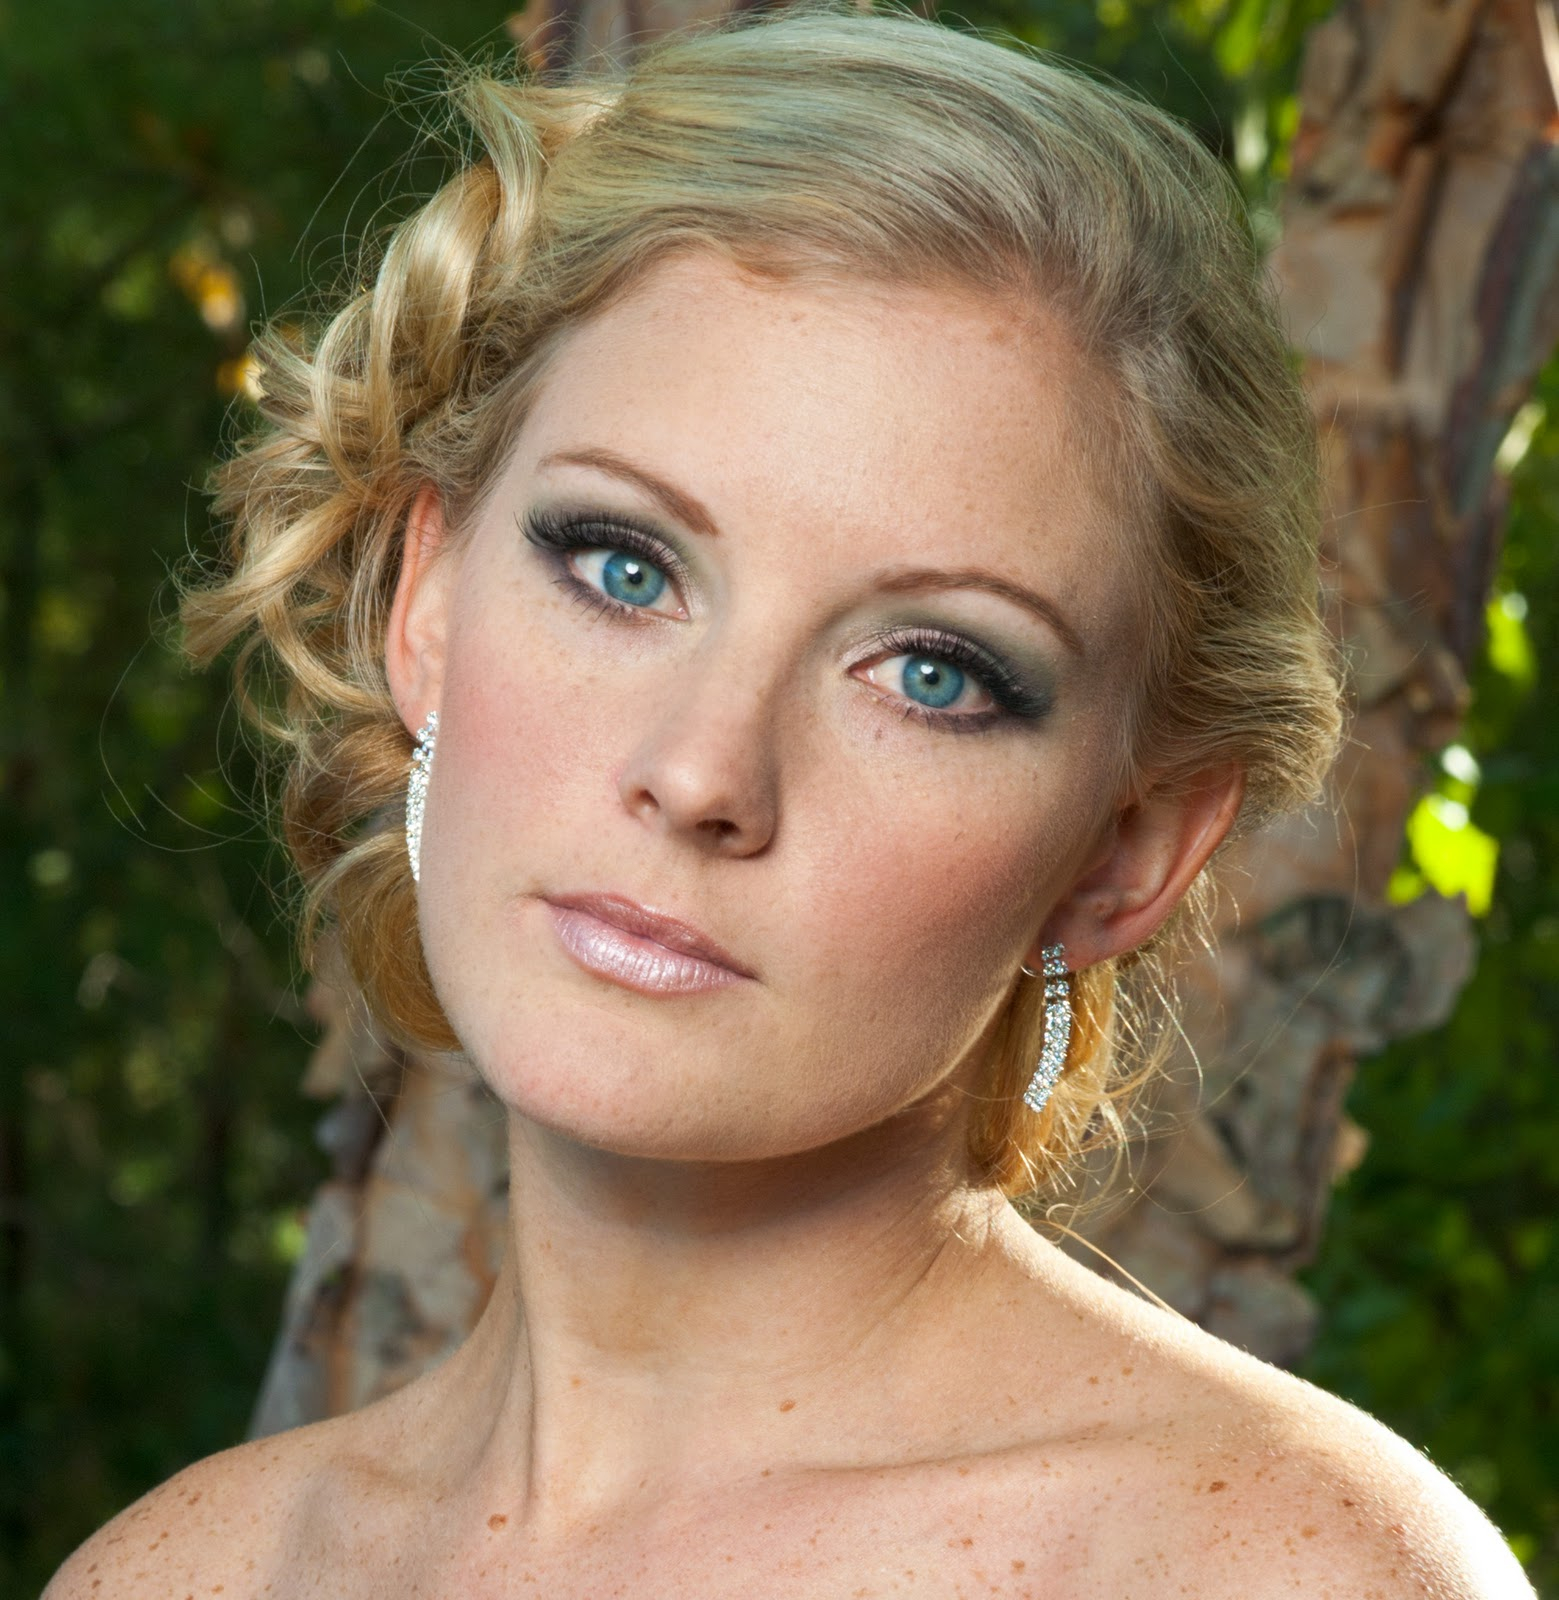 Makeup For Blondes With Blue Eyes Blonde Hair Blue Eyes Wedding Makeup Wedding Day